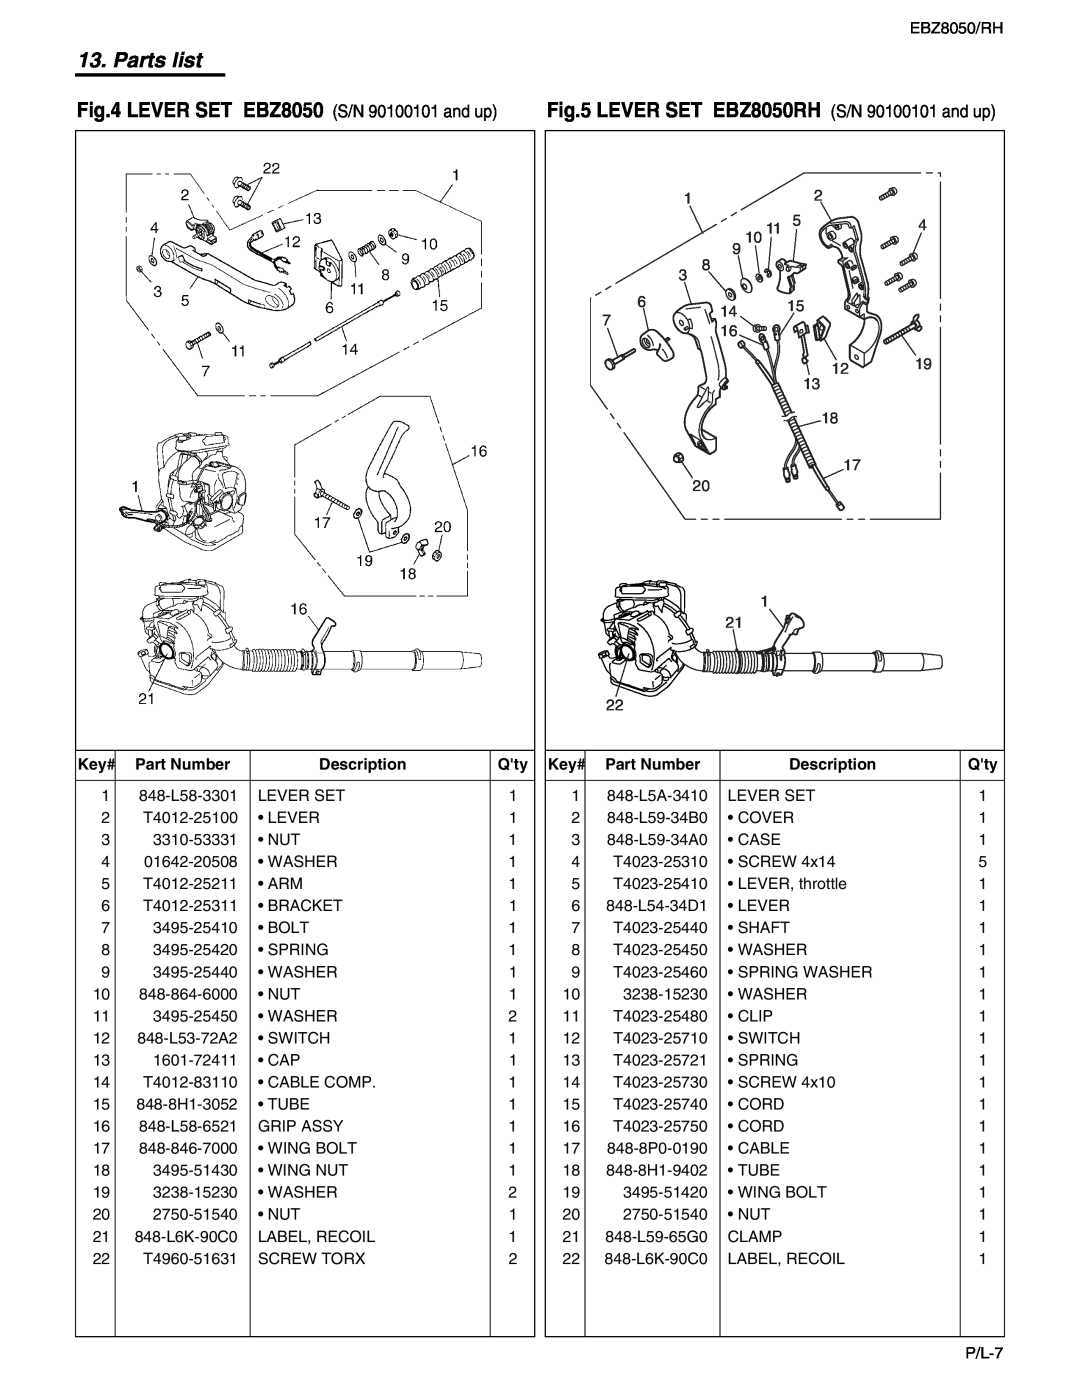 RedMax manual LEVER SET EBZ8050 S/N 90100101 and up, LEVER SET EBZ8050RH S/N 90100101 and up, Parts list 